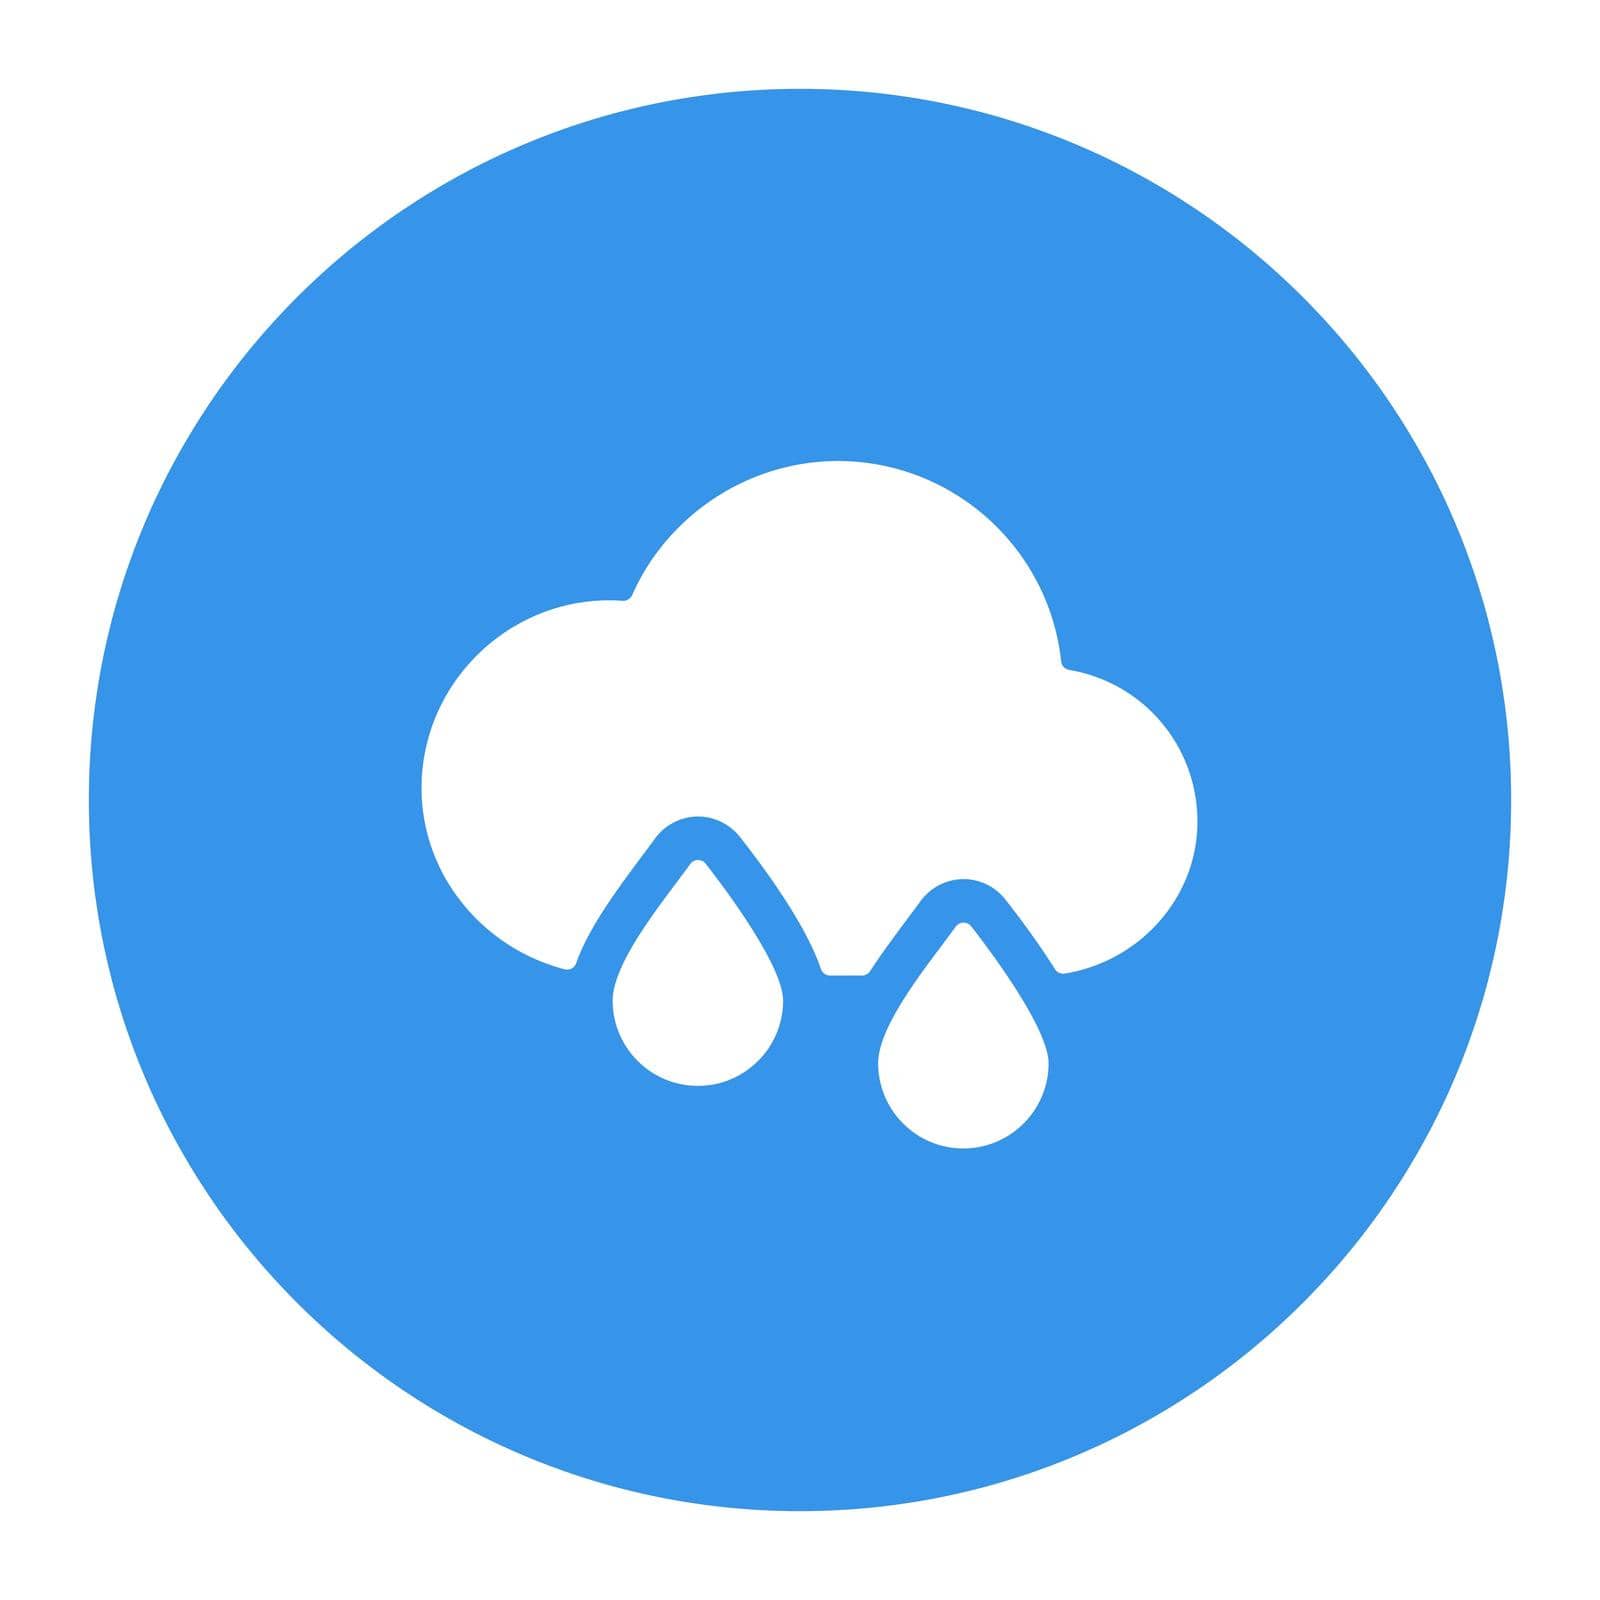 Raincloud with raindrops vector glyph icon. Meteorology sign. Graph symbol for travel, tourism and weather web site and apps design, logo, app, UI